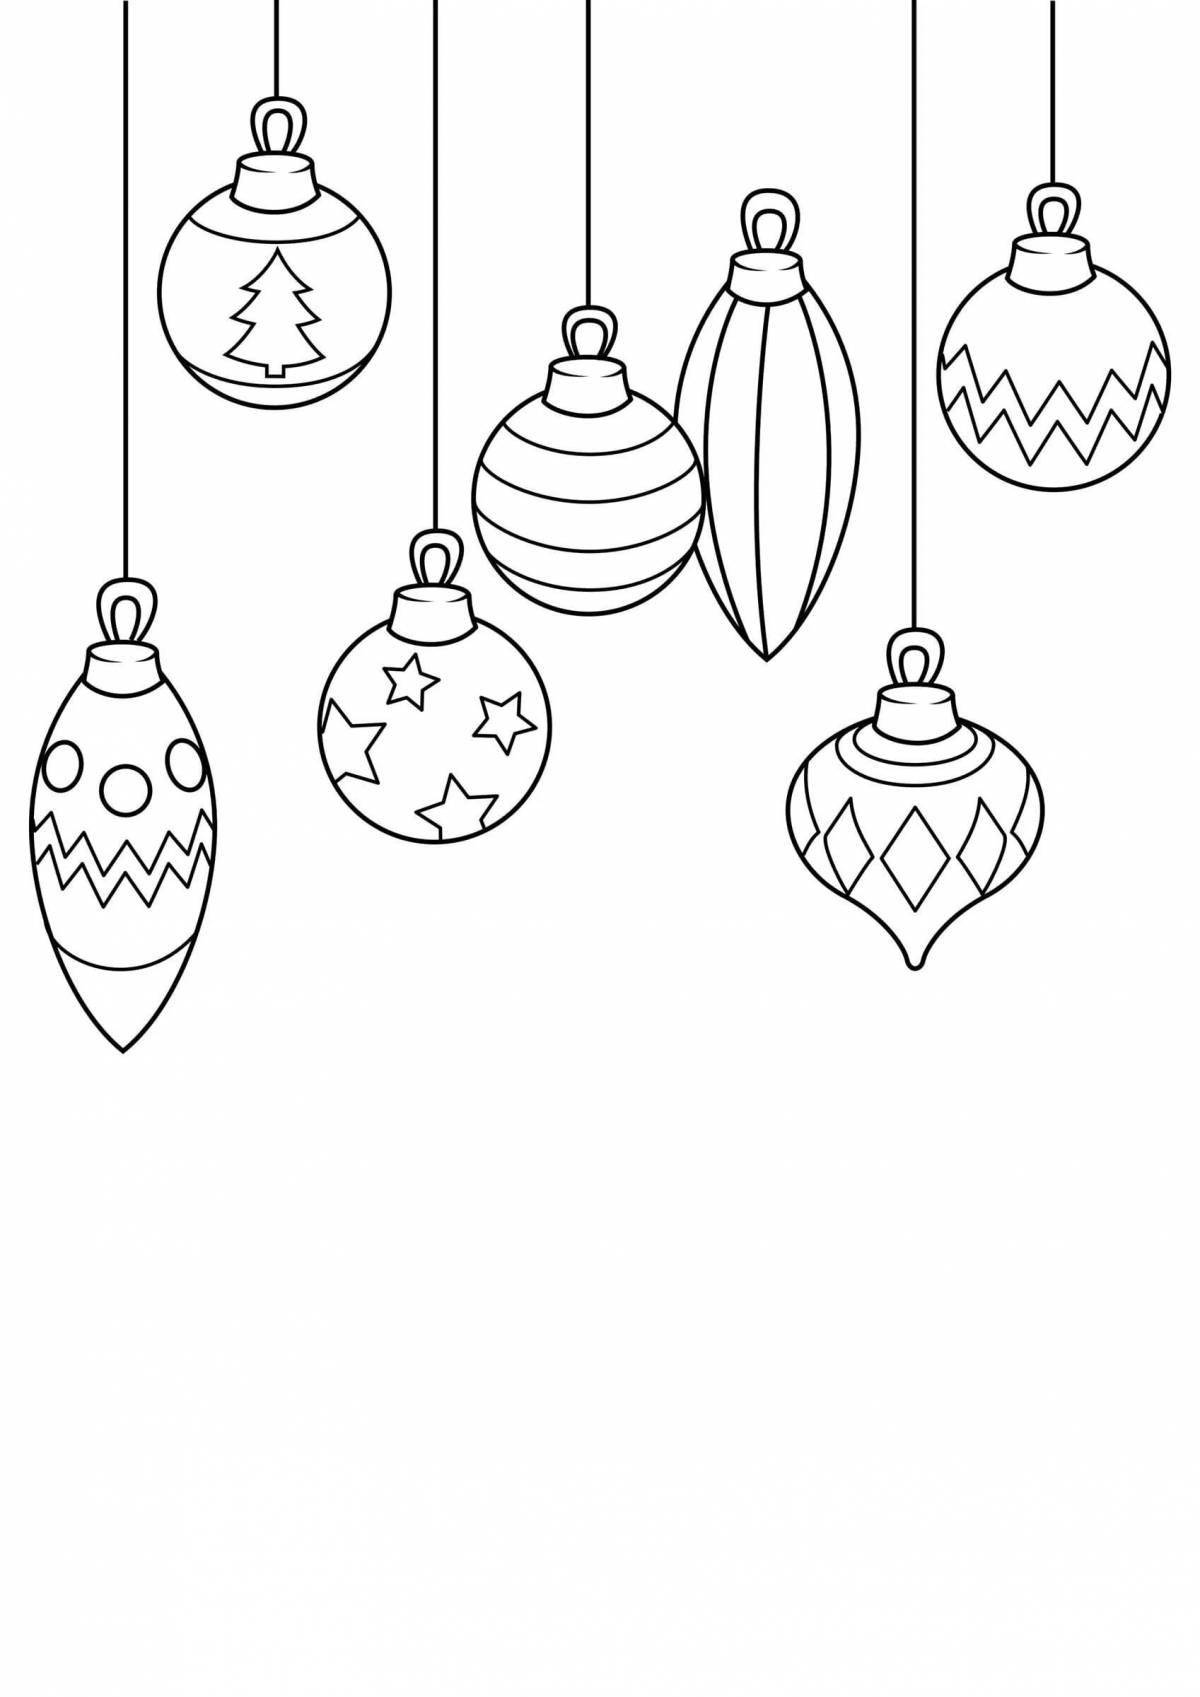 Glitter Christmas decorations for 5-6 year olds